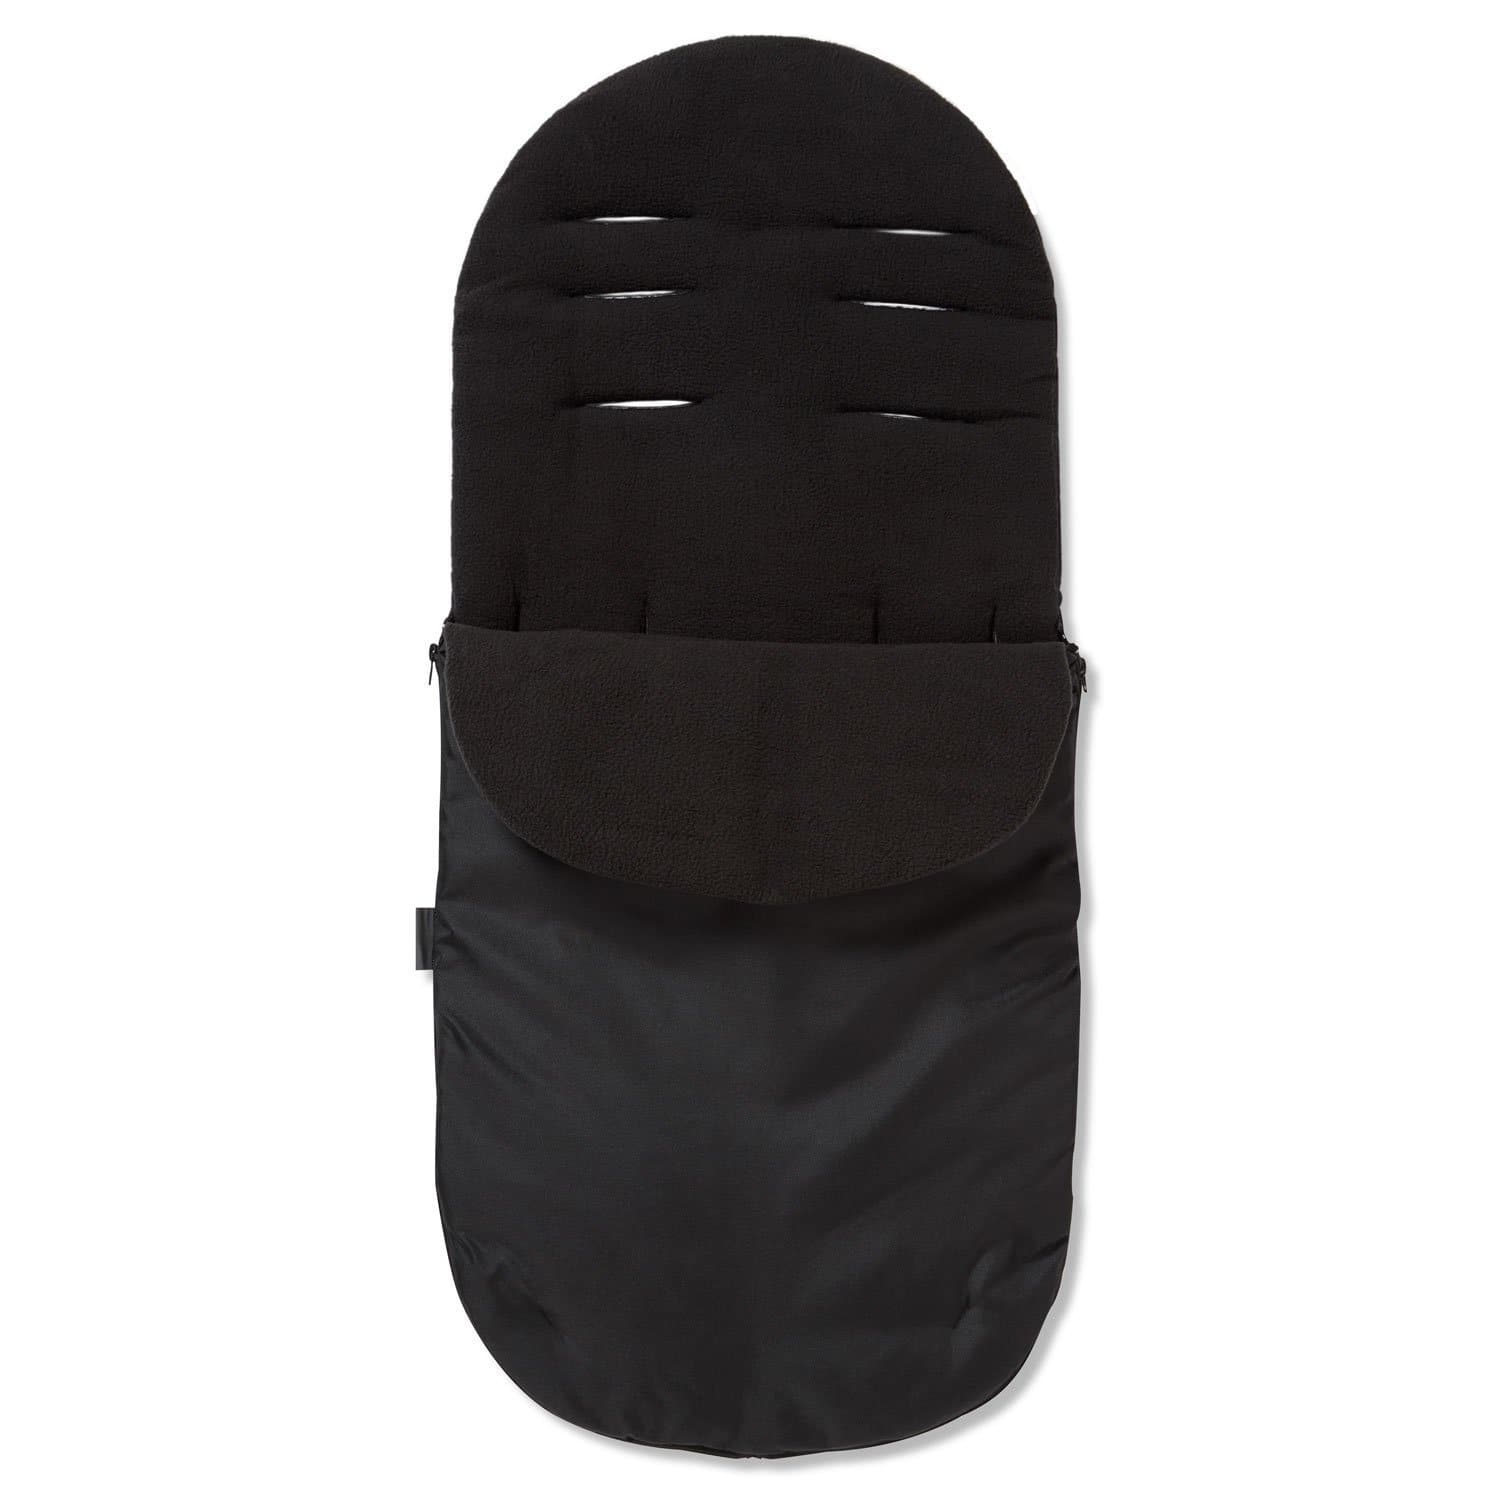 Footmuff / Cosy Toes Compatible with Safety 1st - Black / Fits All Models | For Your Little One